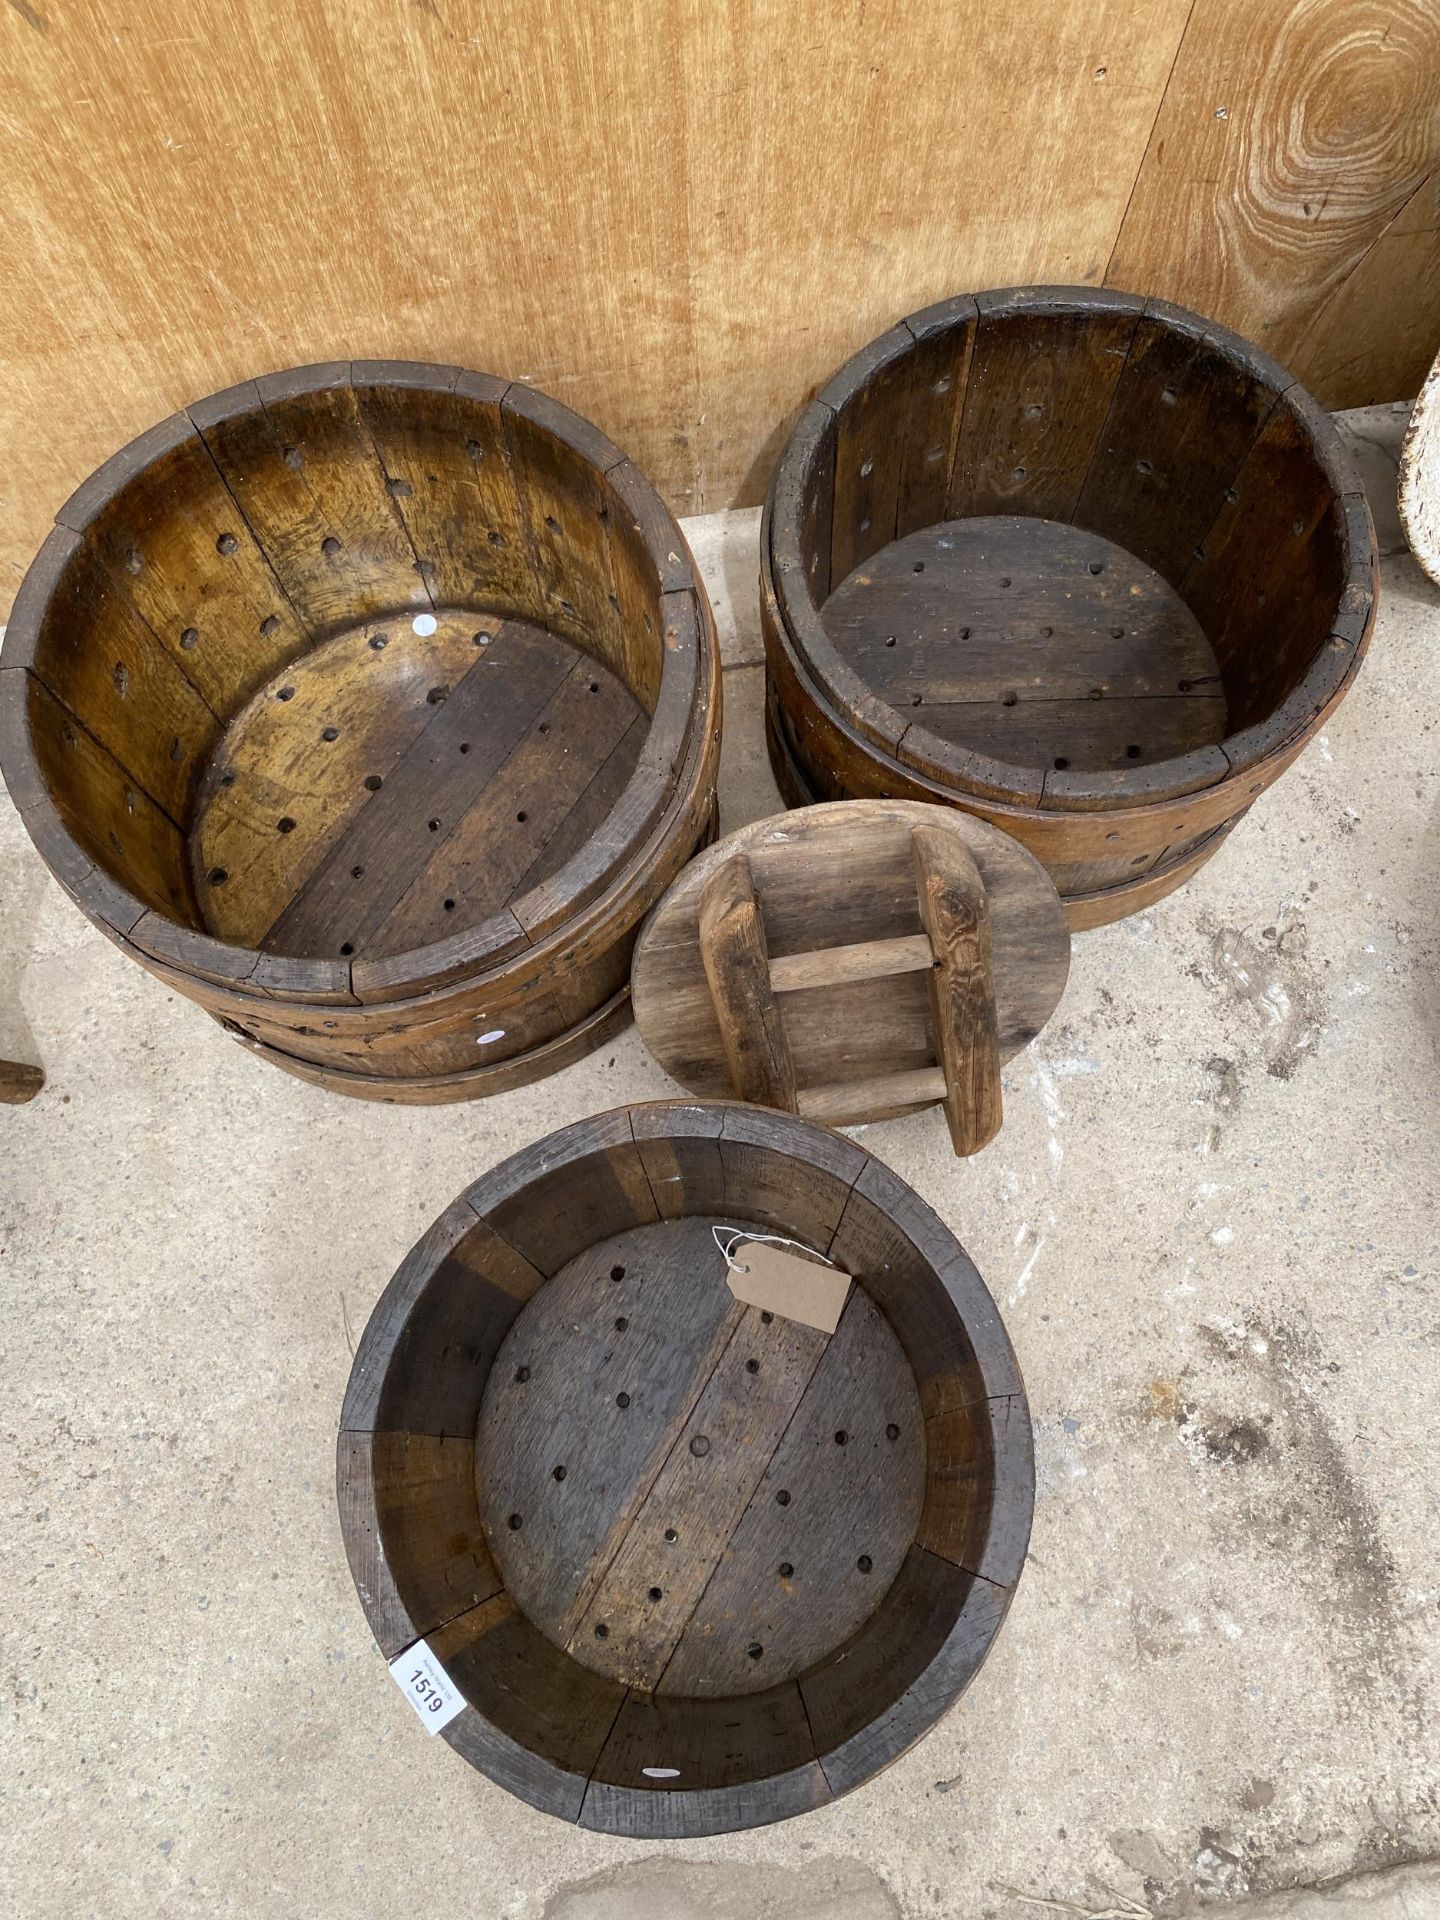 THREE VINTAGE WOODEN CHEESE VAT PRESSES - Image 4 of 4